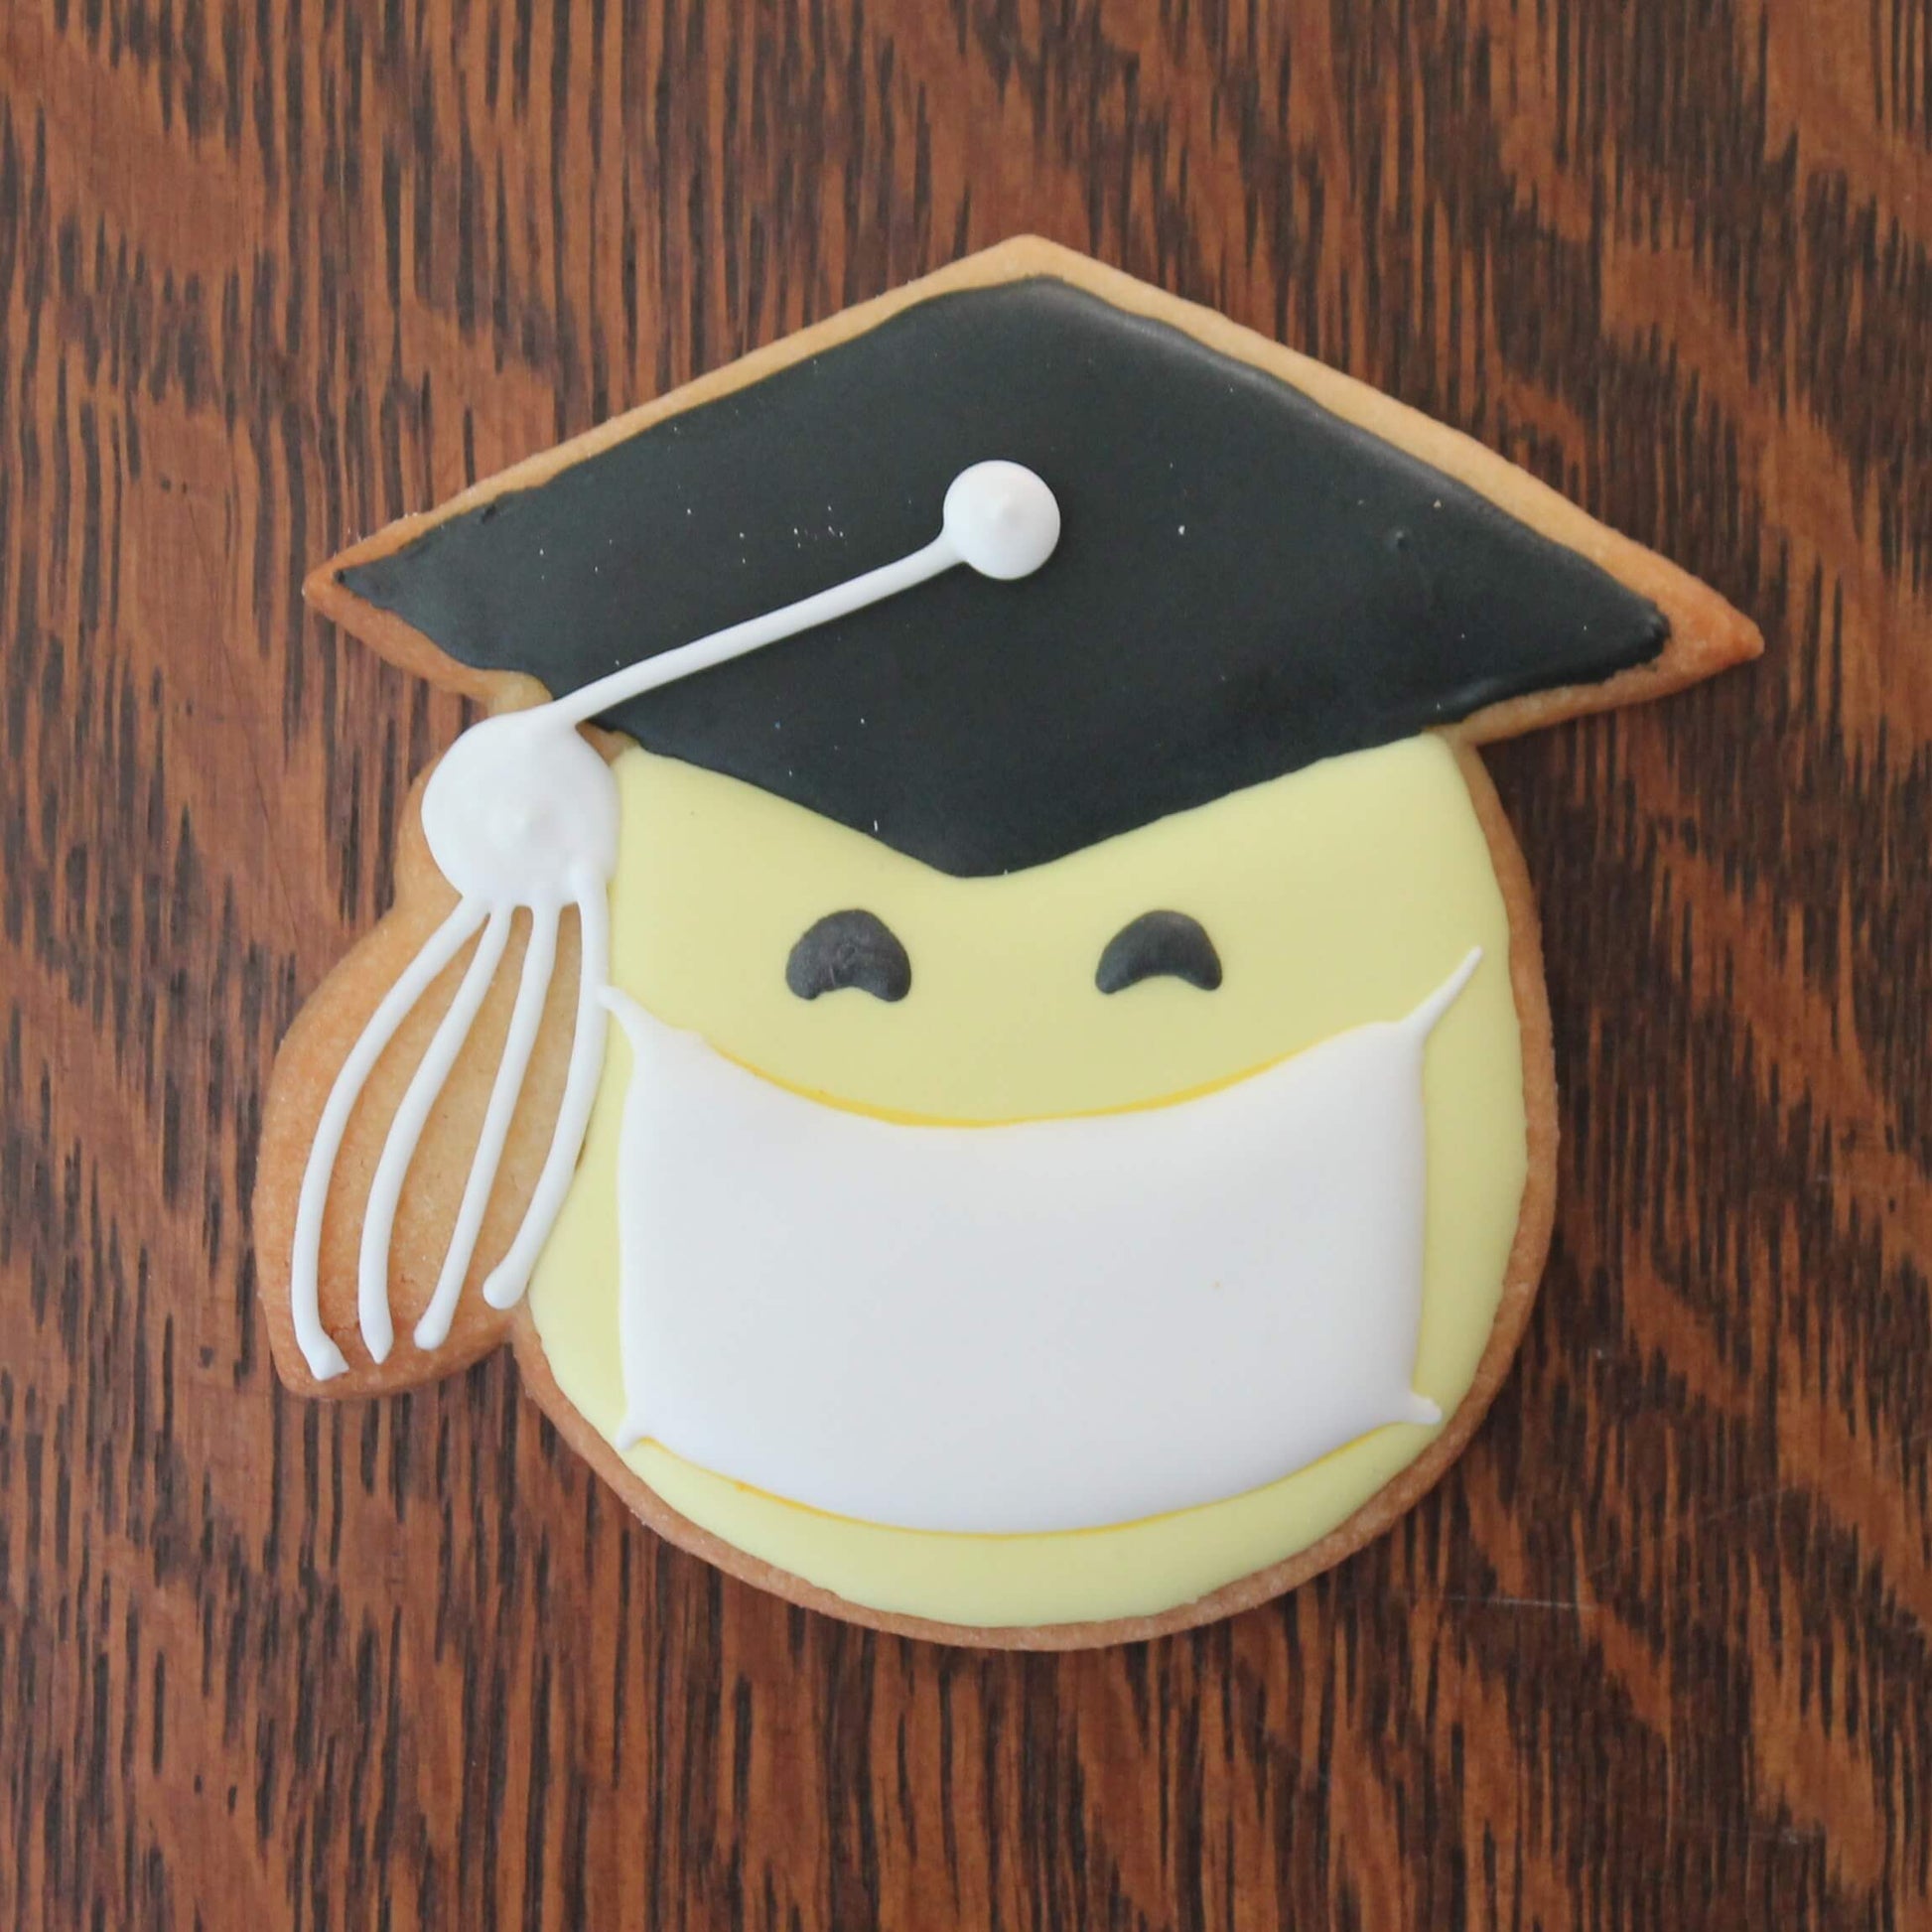 Smiley face grad with mask